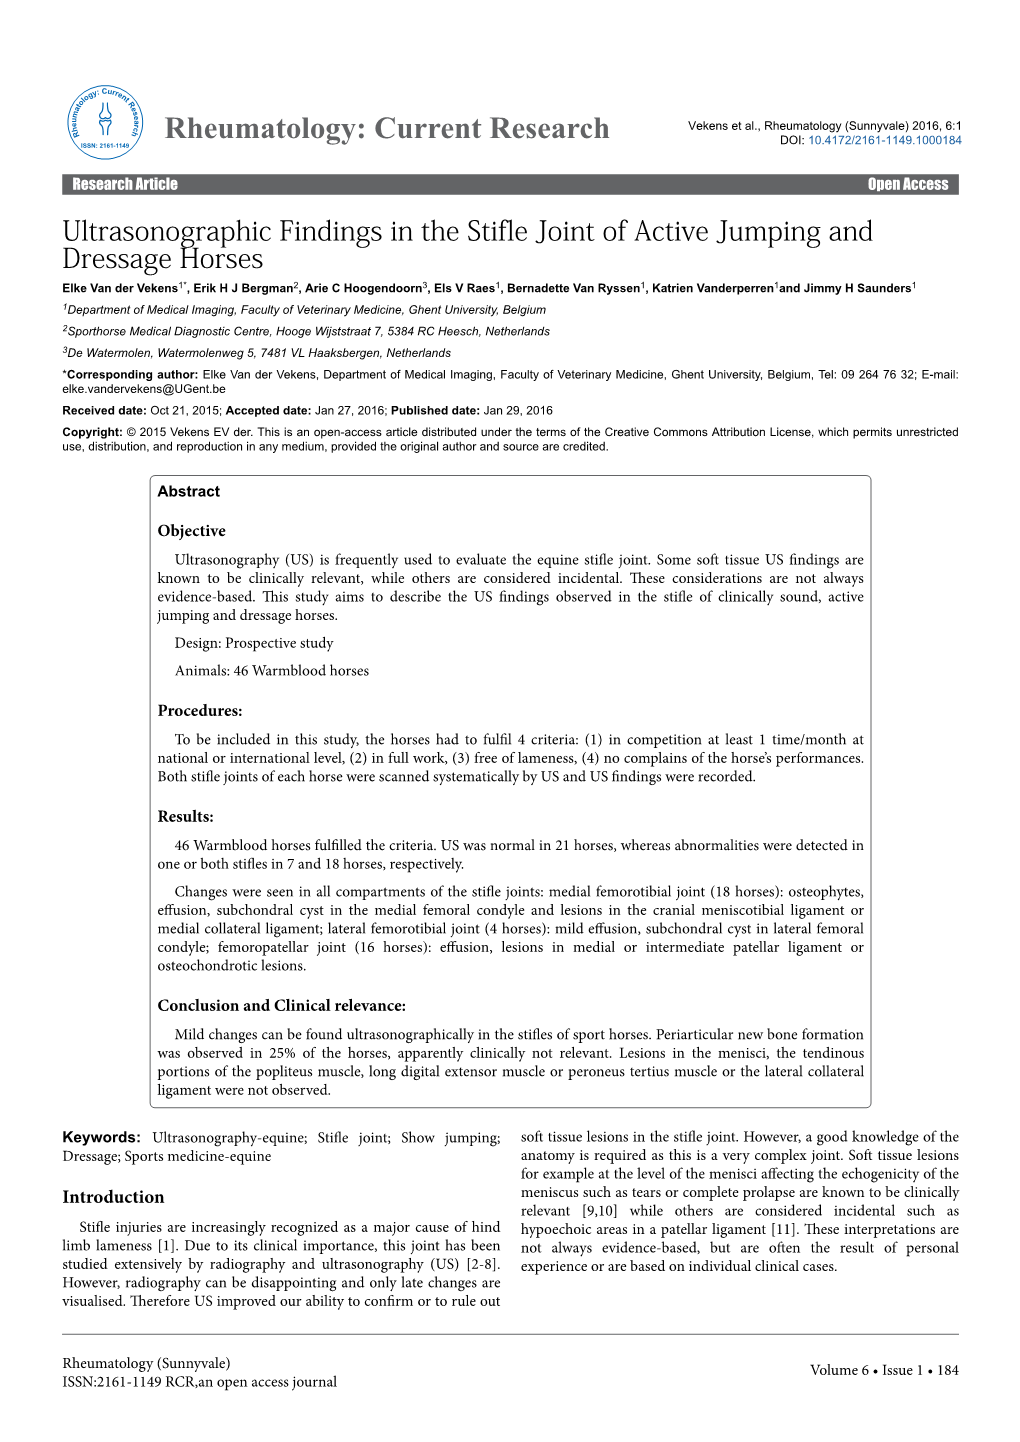 Ultrasonographic Findings in the Stifle Joint of Active Jumping And